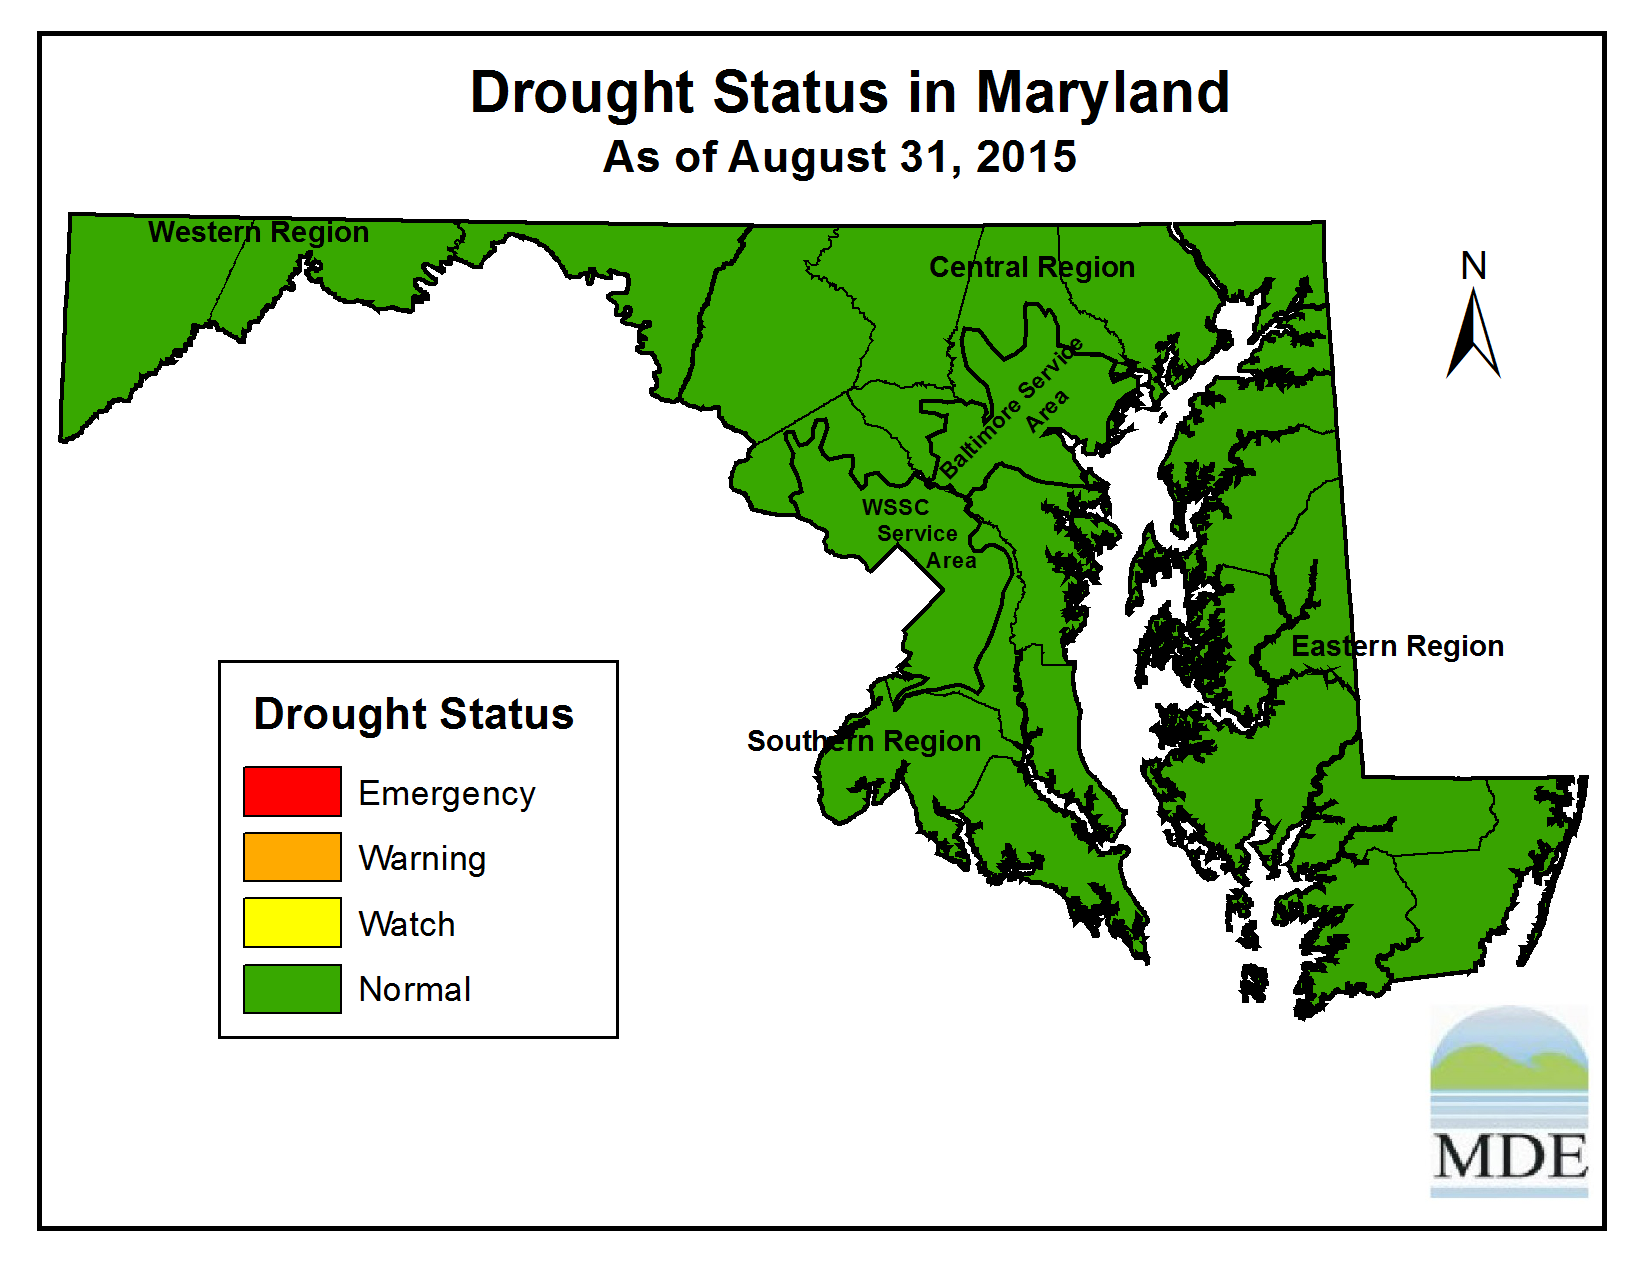 Drought Status as of August 31, 2015